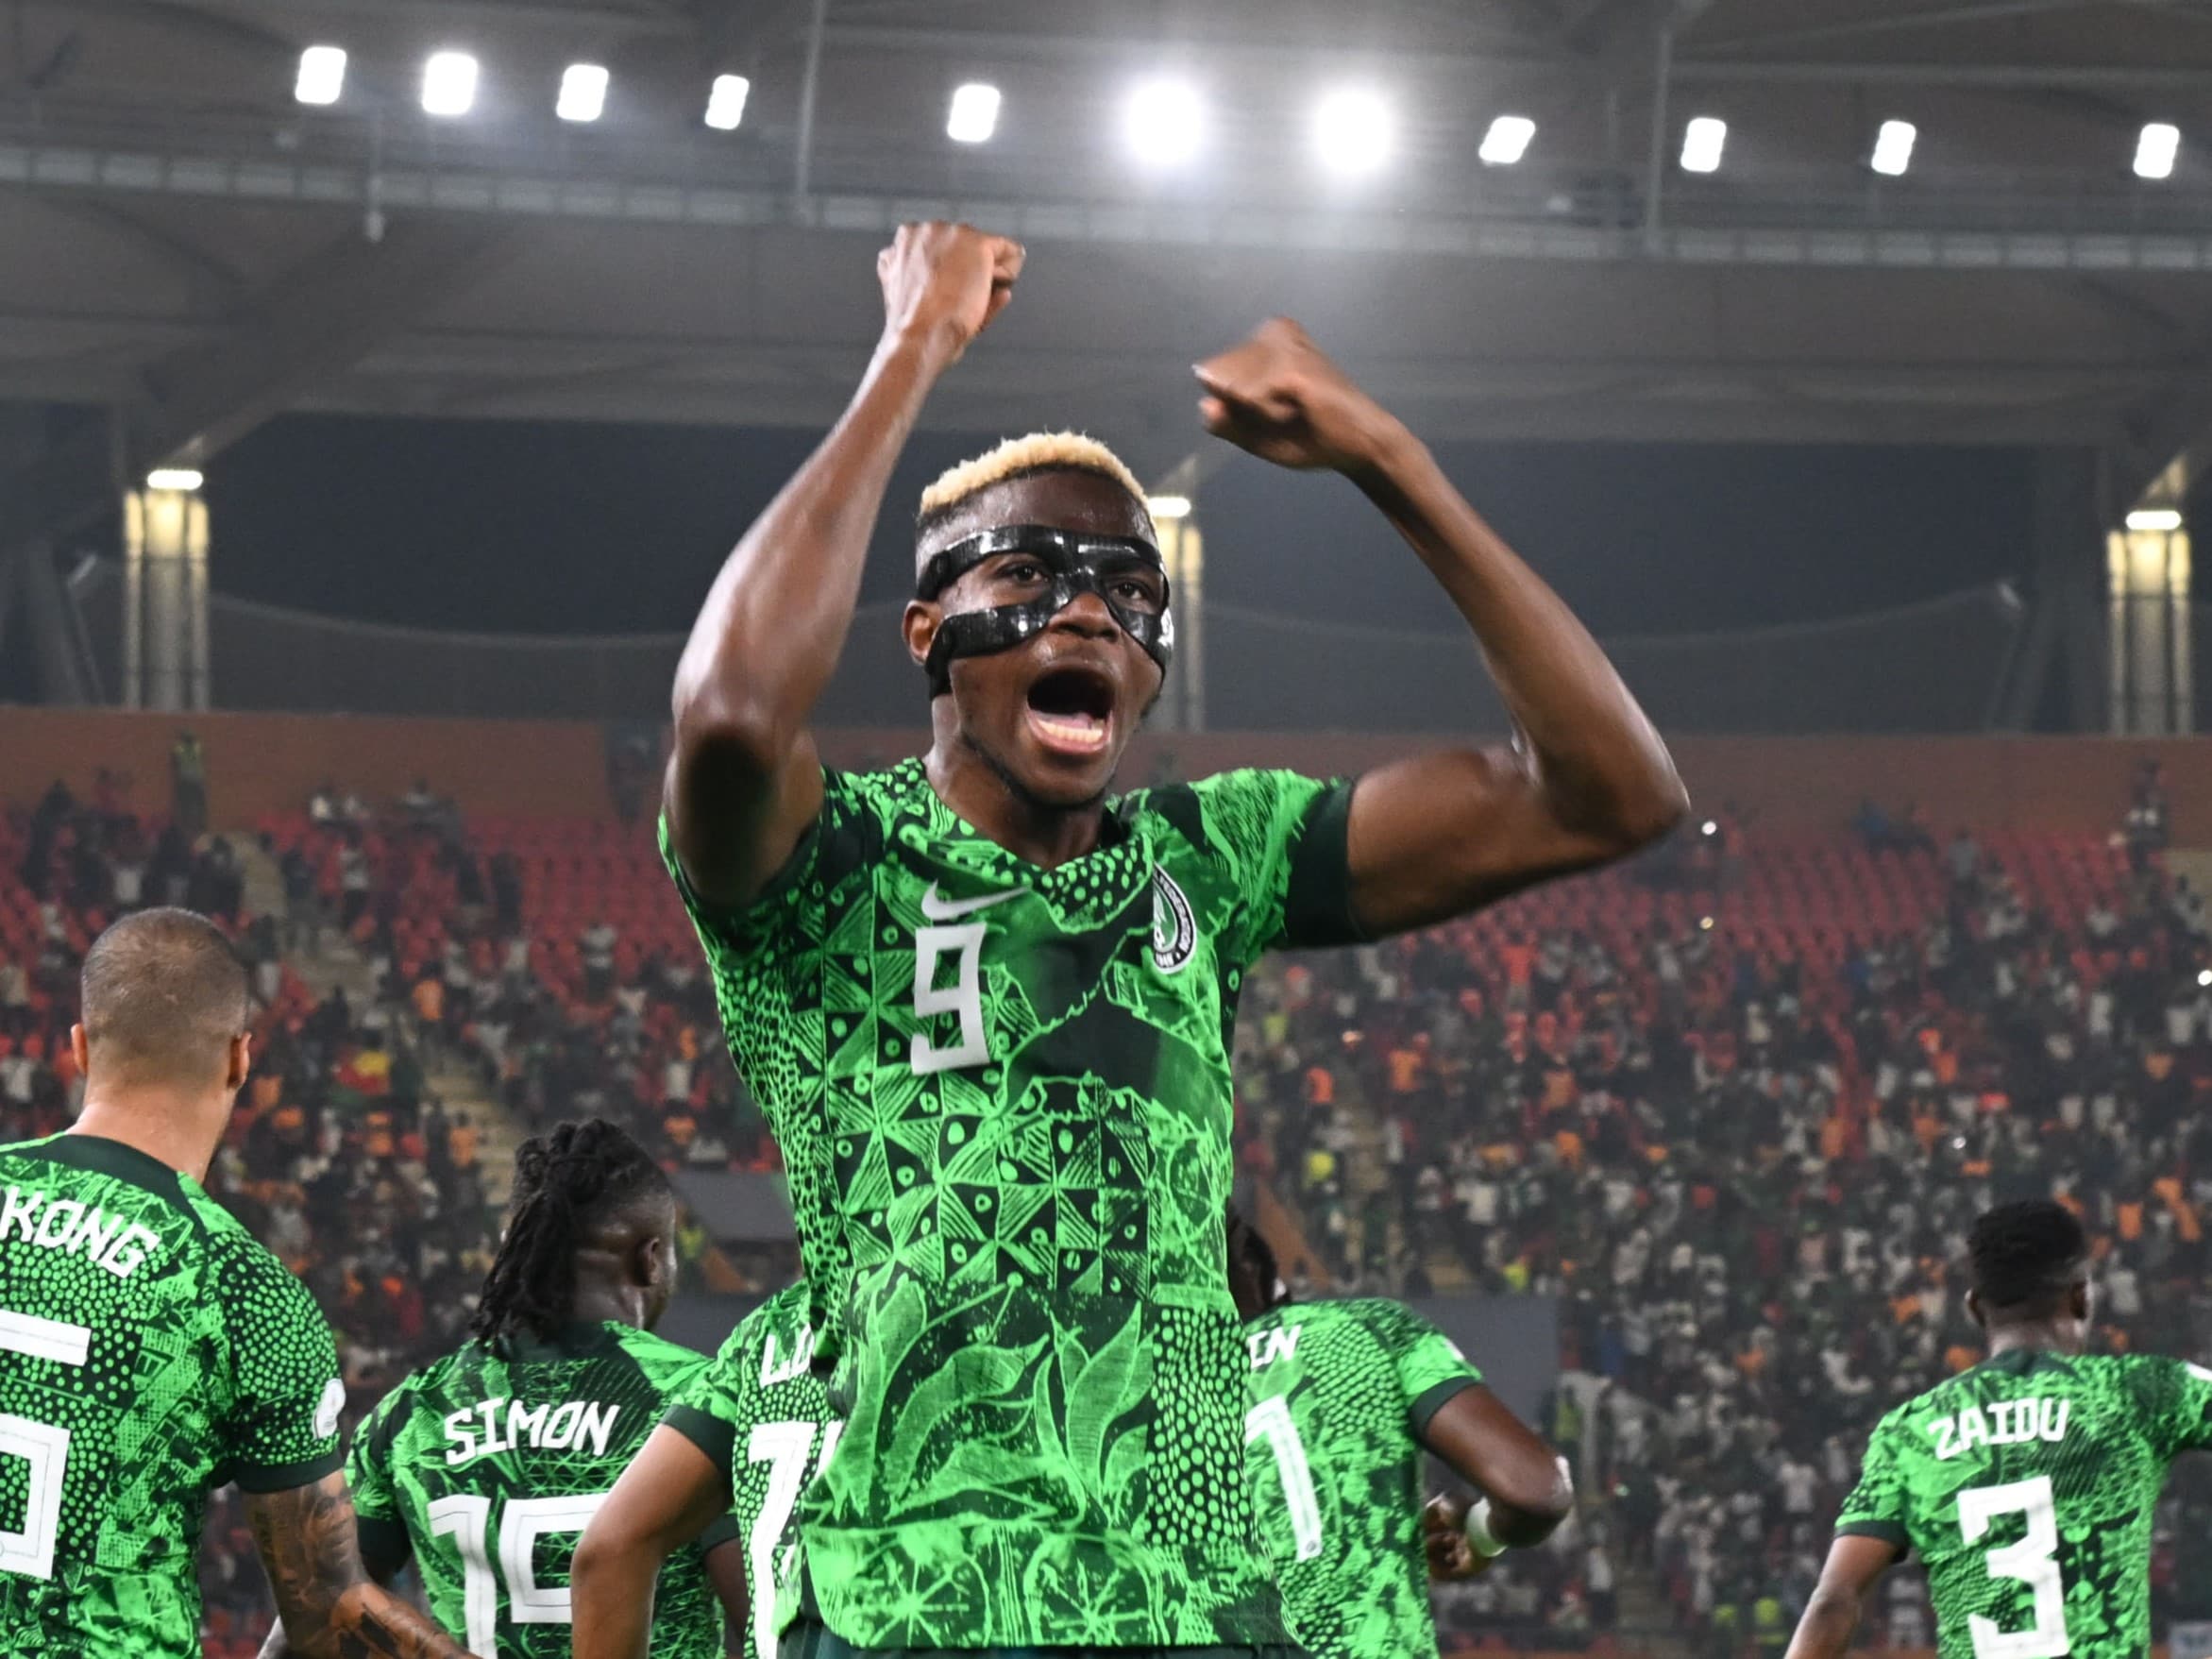 AFCON 2023: Boost for Nigeria, blow for South Africa as Ivory Coast vs DR Congo promises thrills